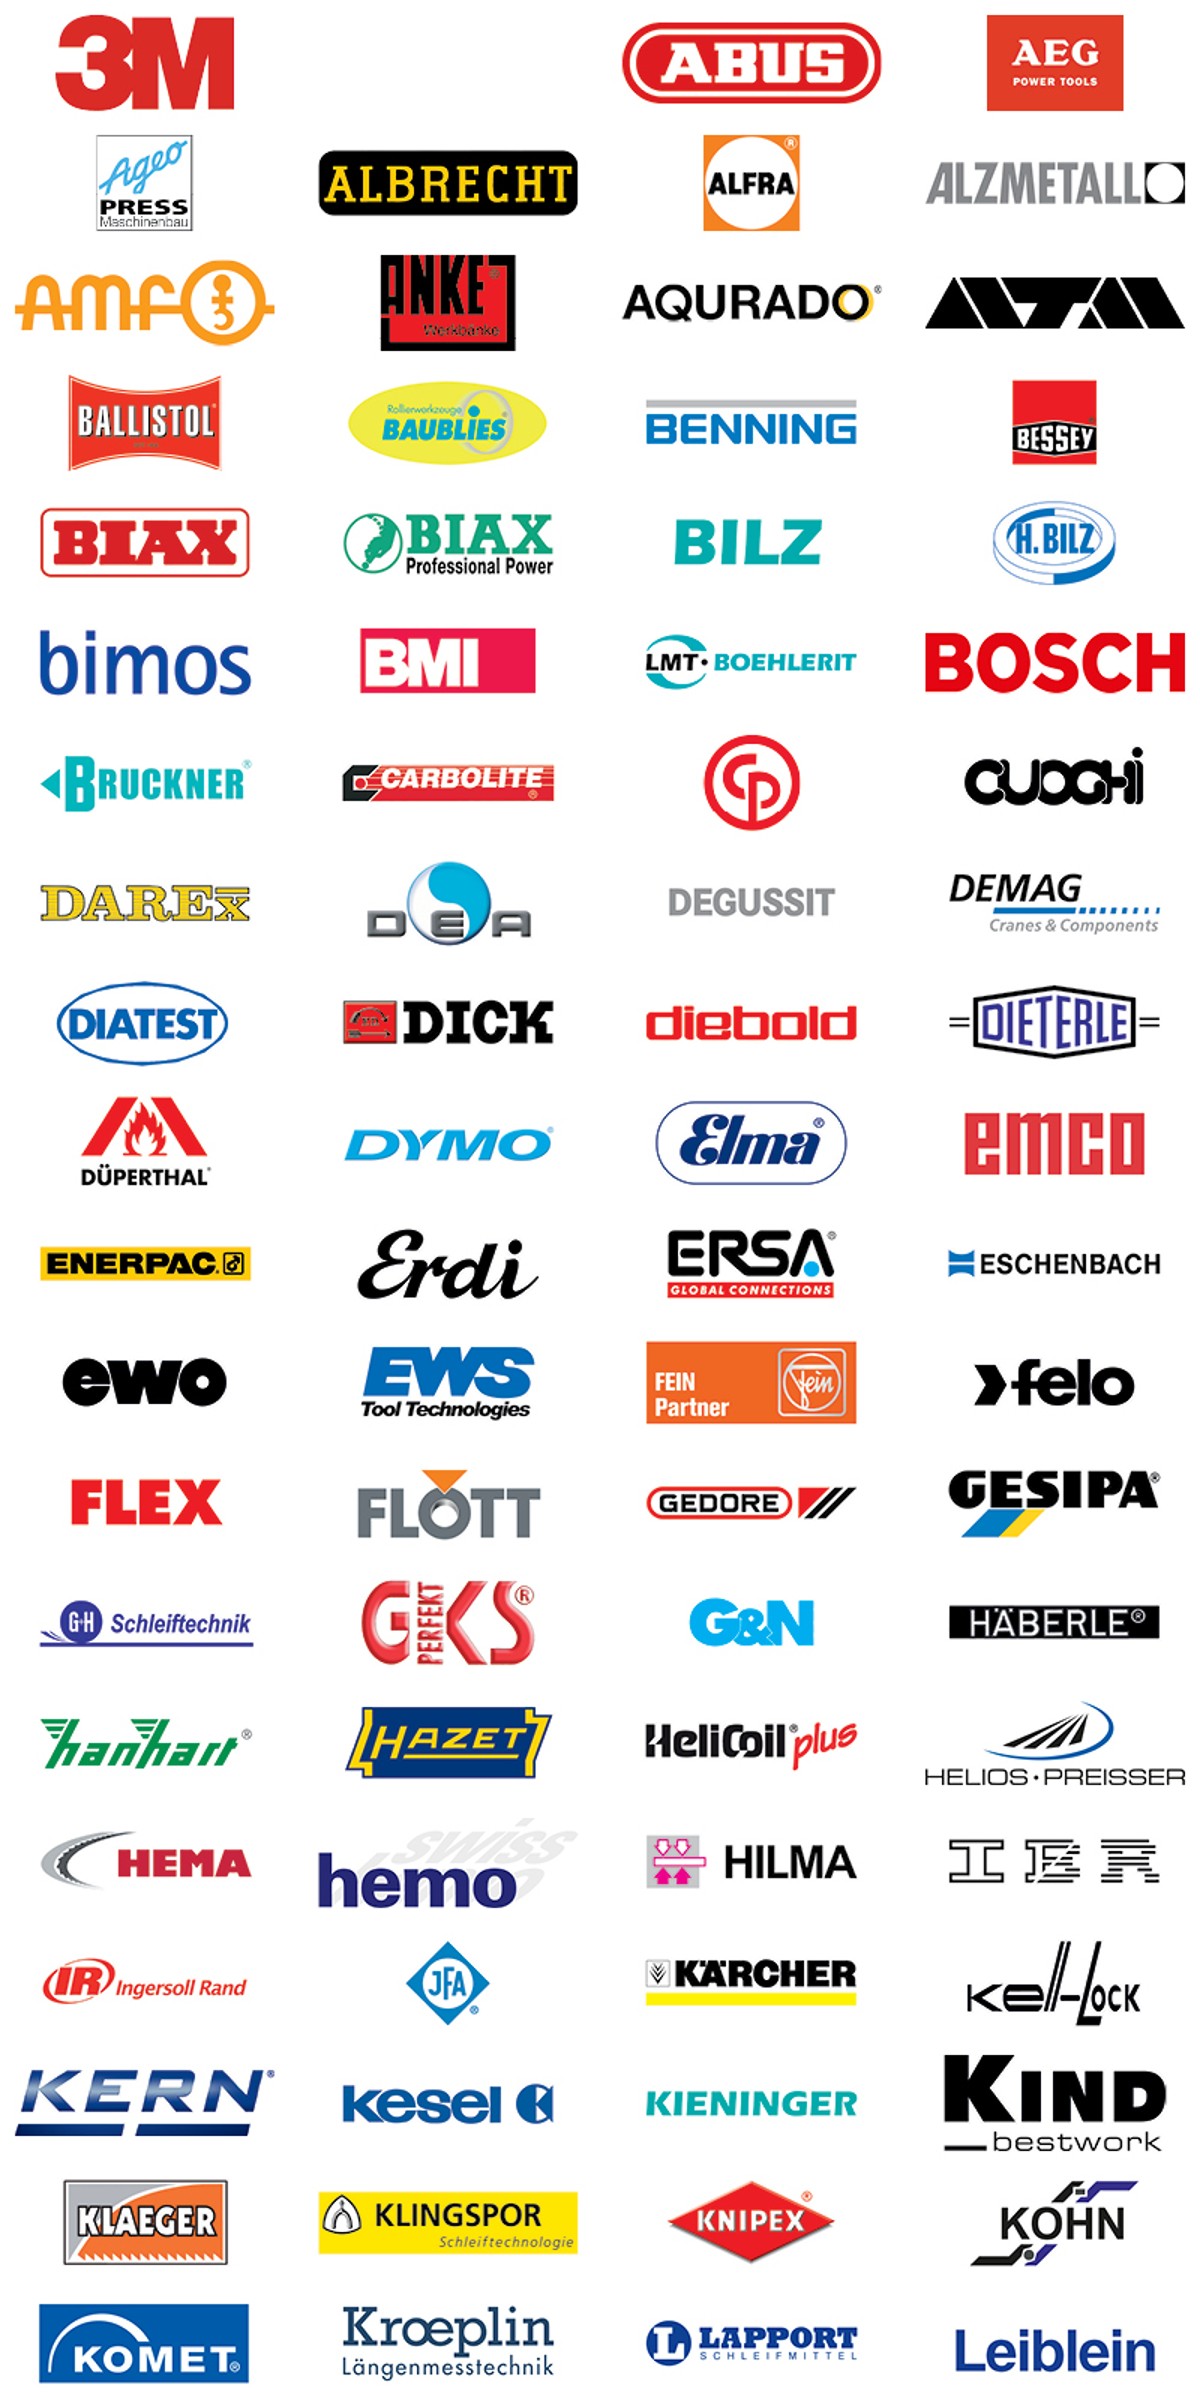 Manufacturer brands available from HAHN+KOLB